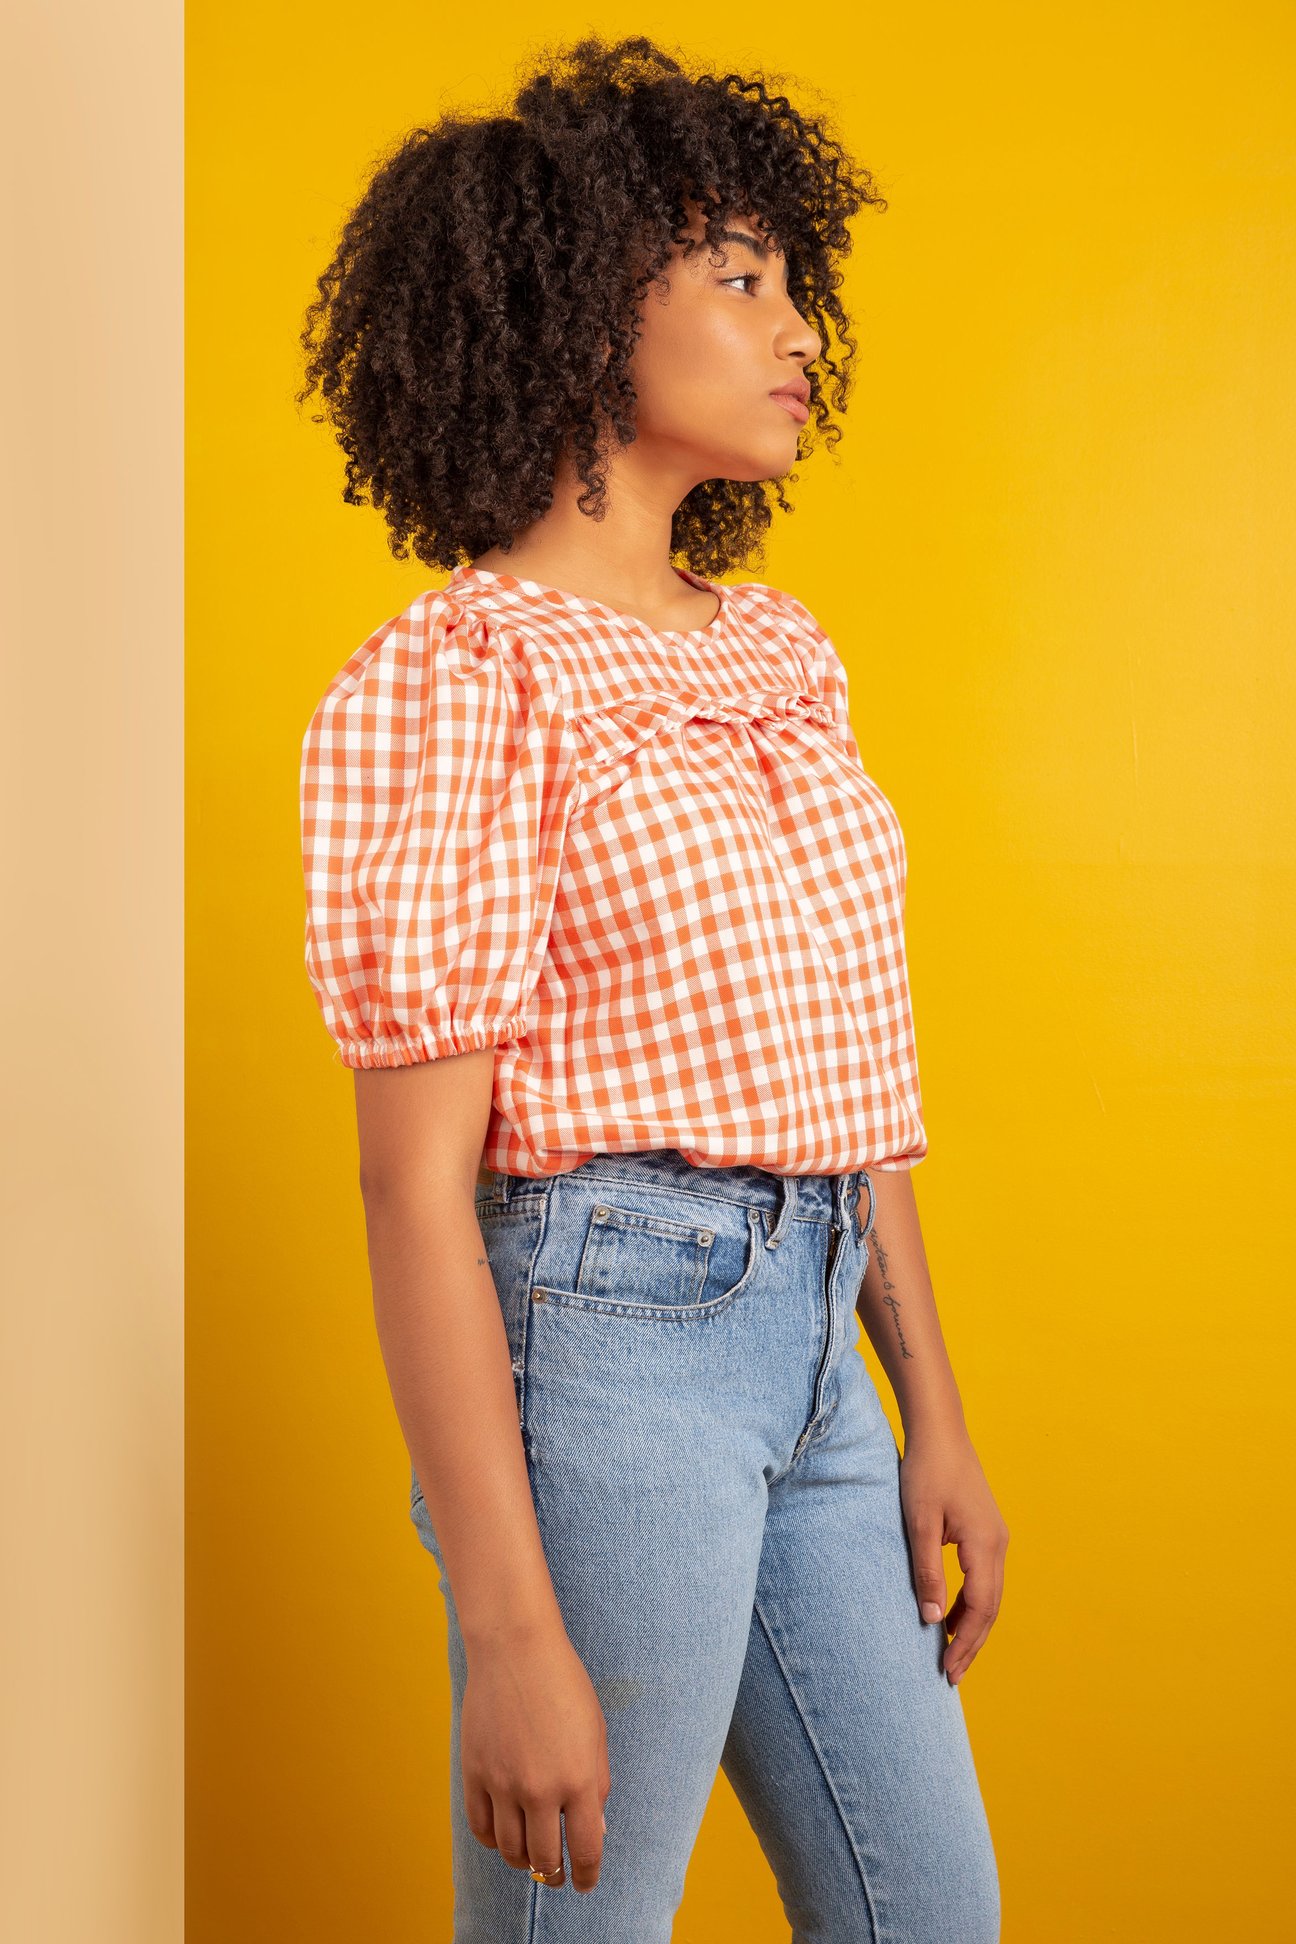 Sagebrush top by Friday Pattern Company